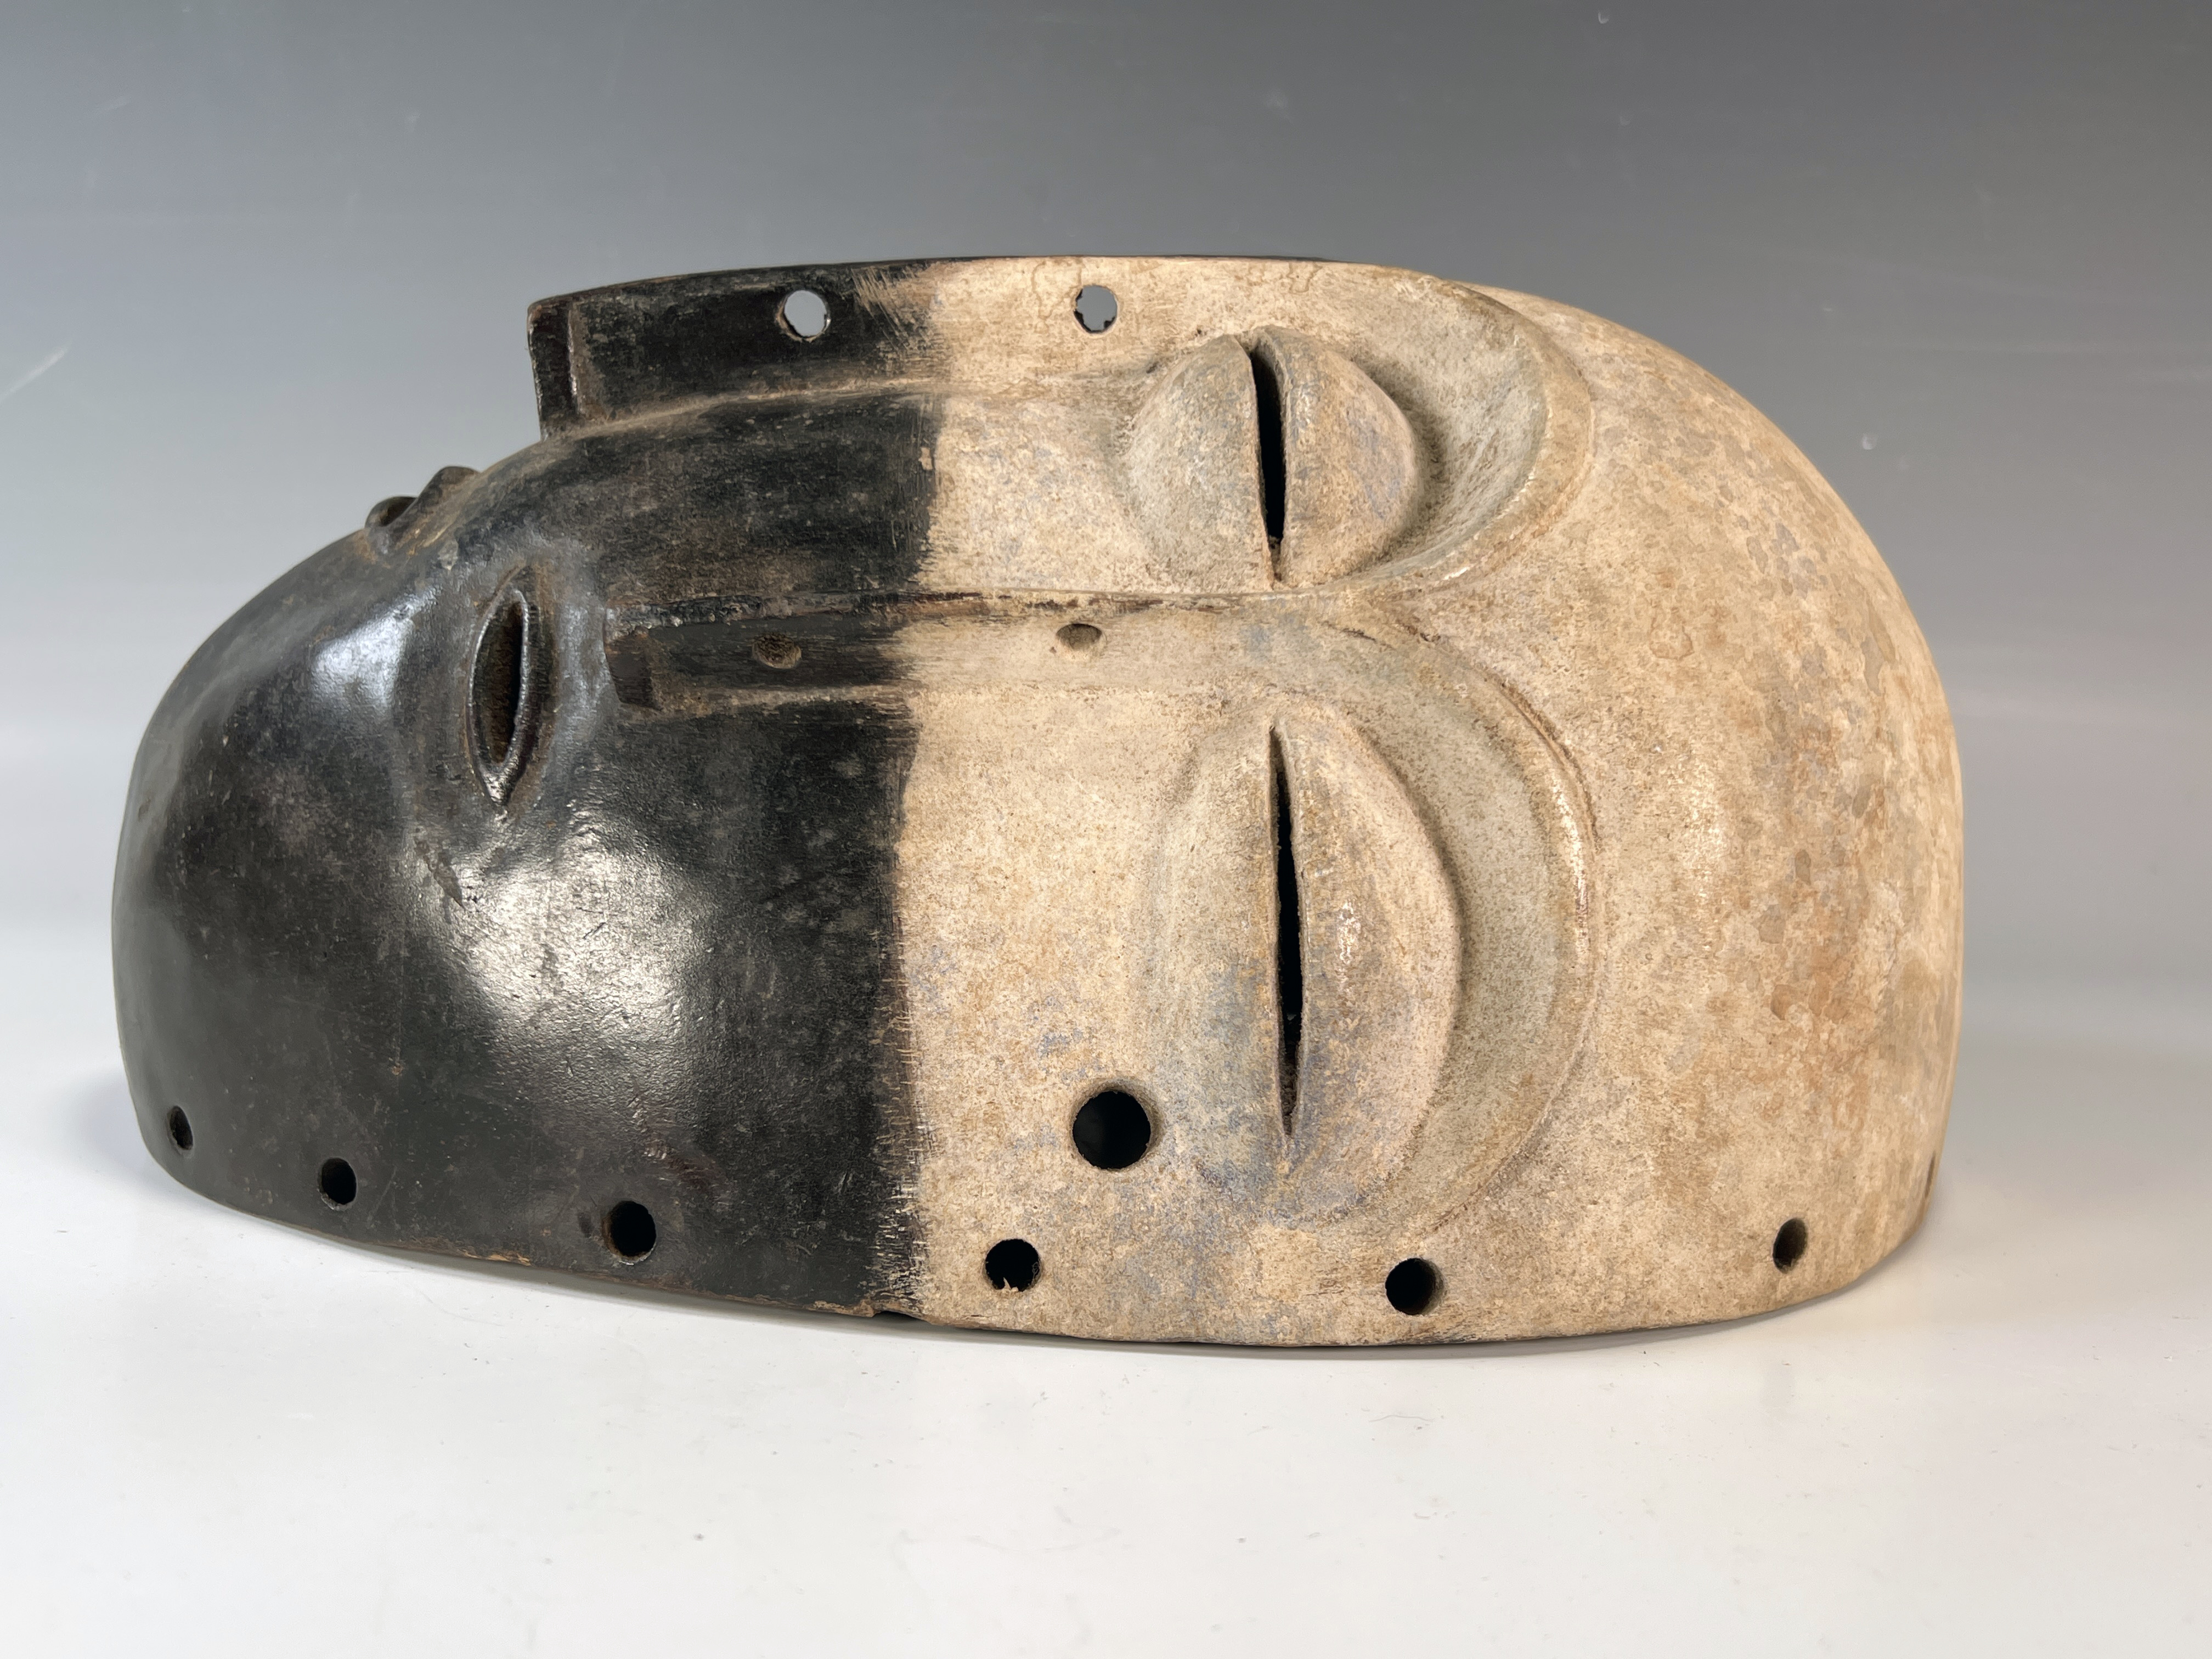 Multiple Faces Mask Lengola Congo Central Africa image 4